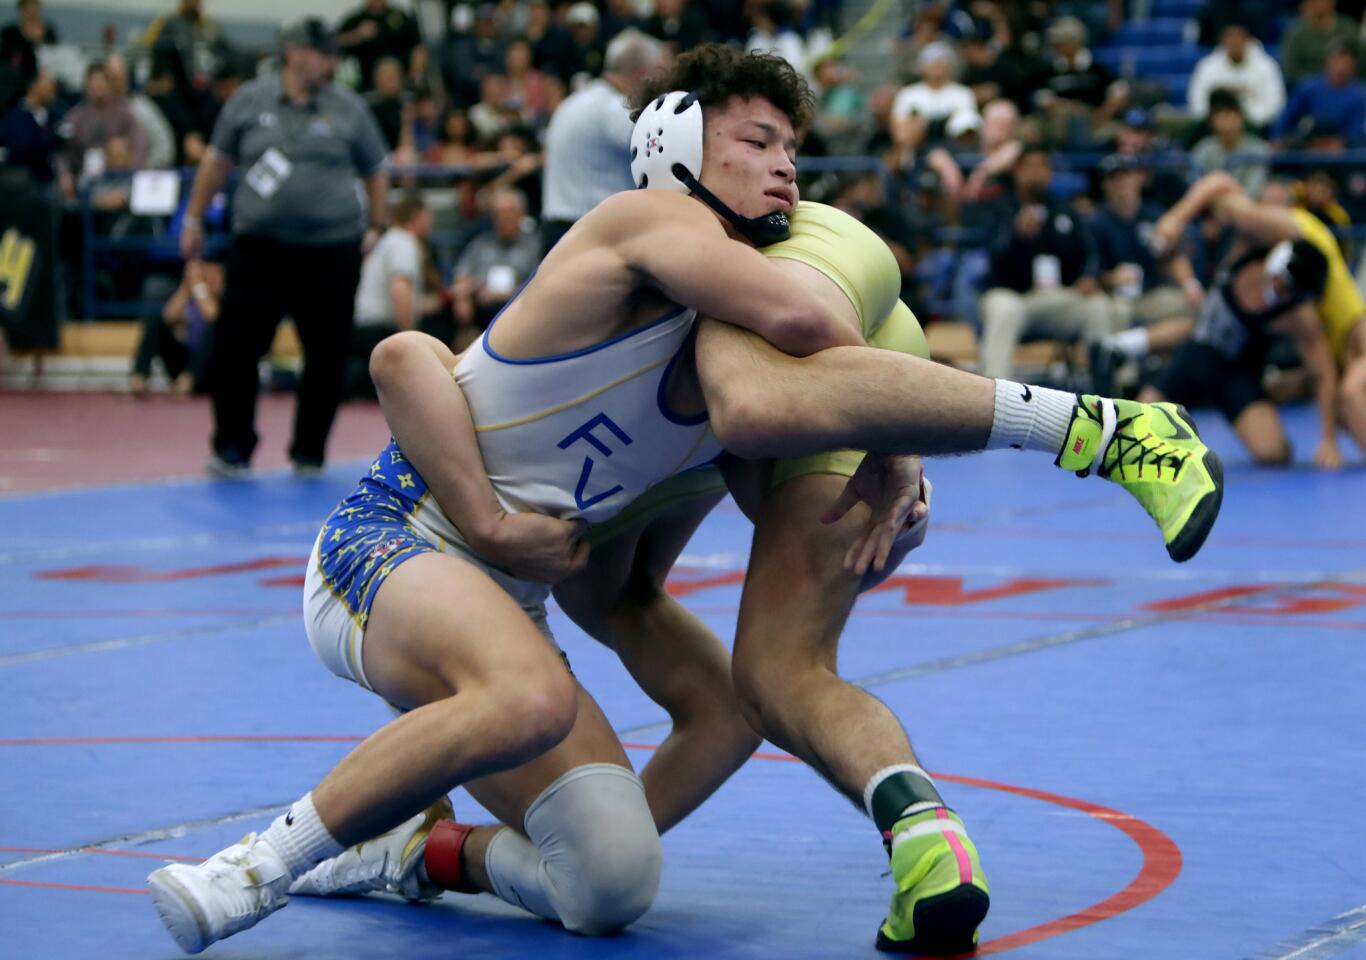 Fountain Valley High School wrestler Max Wilner won the 160-lb. championship match vs. Louis Rojas of St. John Bosco, in the CIF SS Masters Meet, at Cerritos College in Norwalk on Saturday, Feb. 16, 2019.